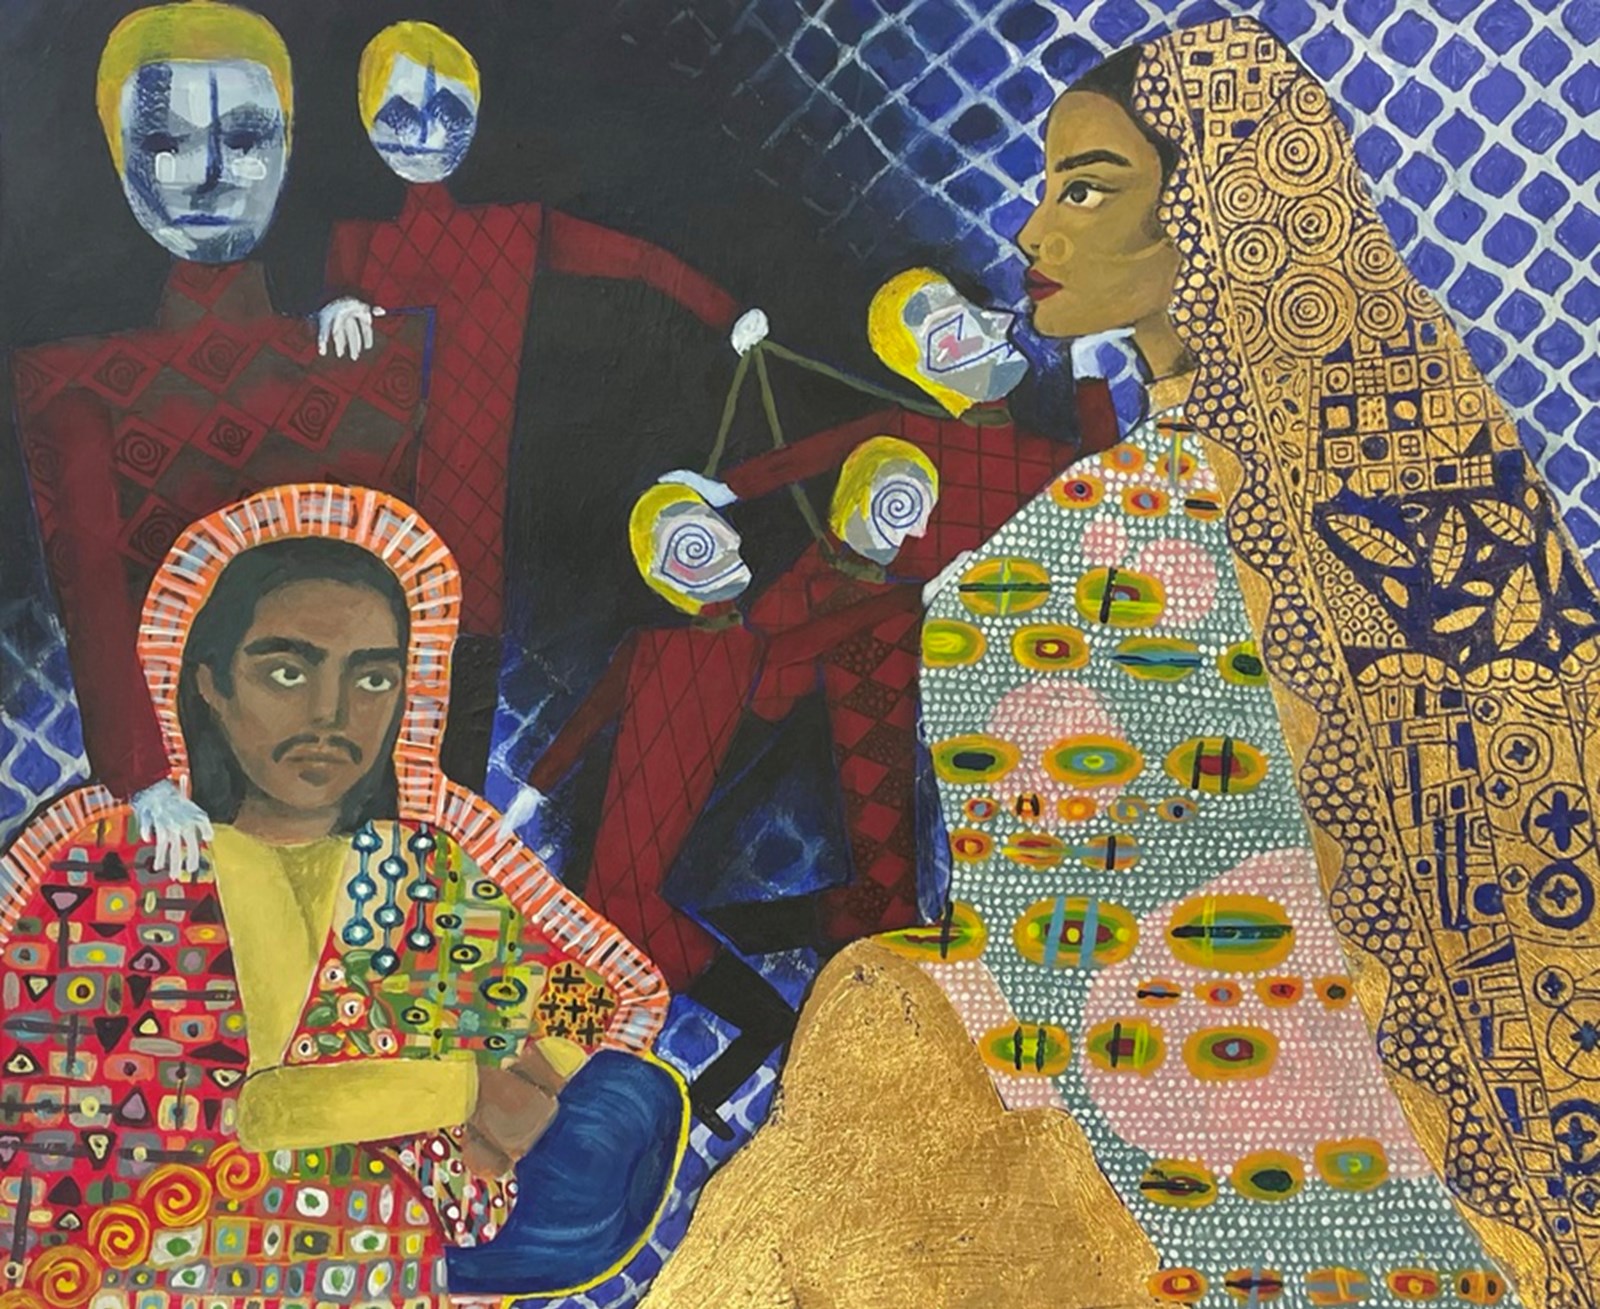 Sukena’s work "To Be a Brown Woman".